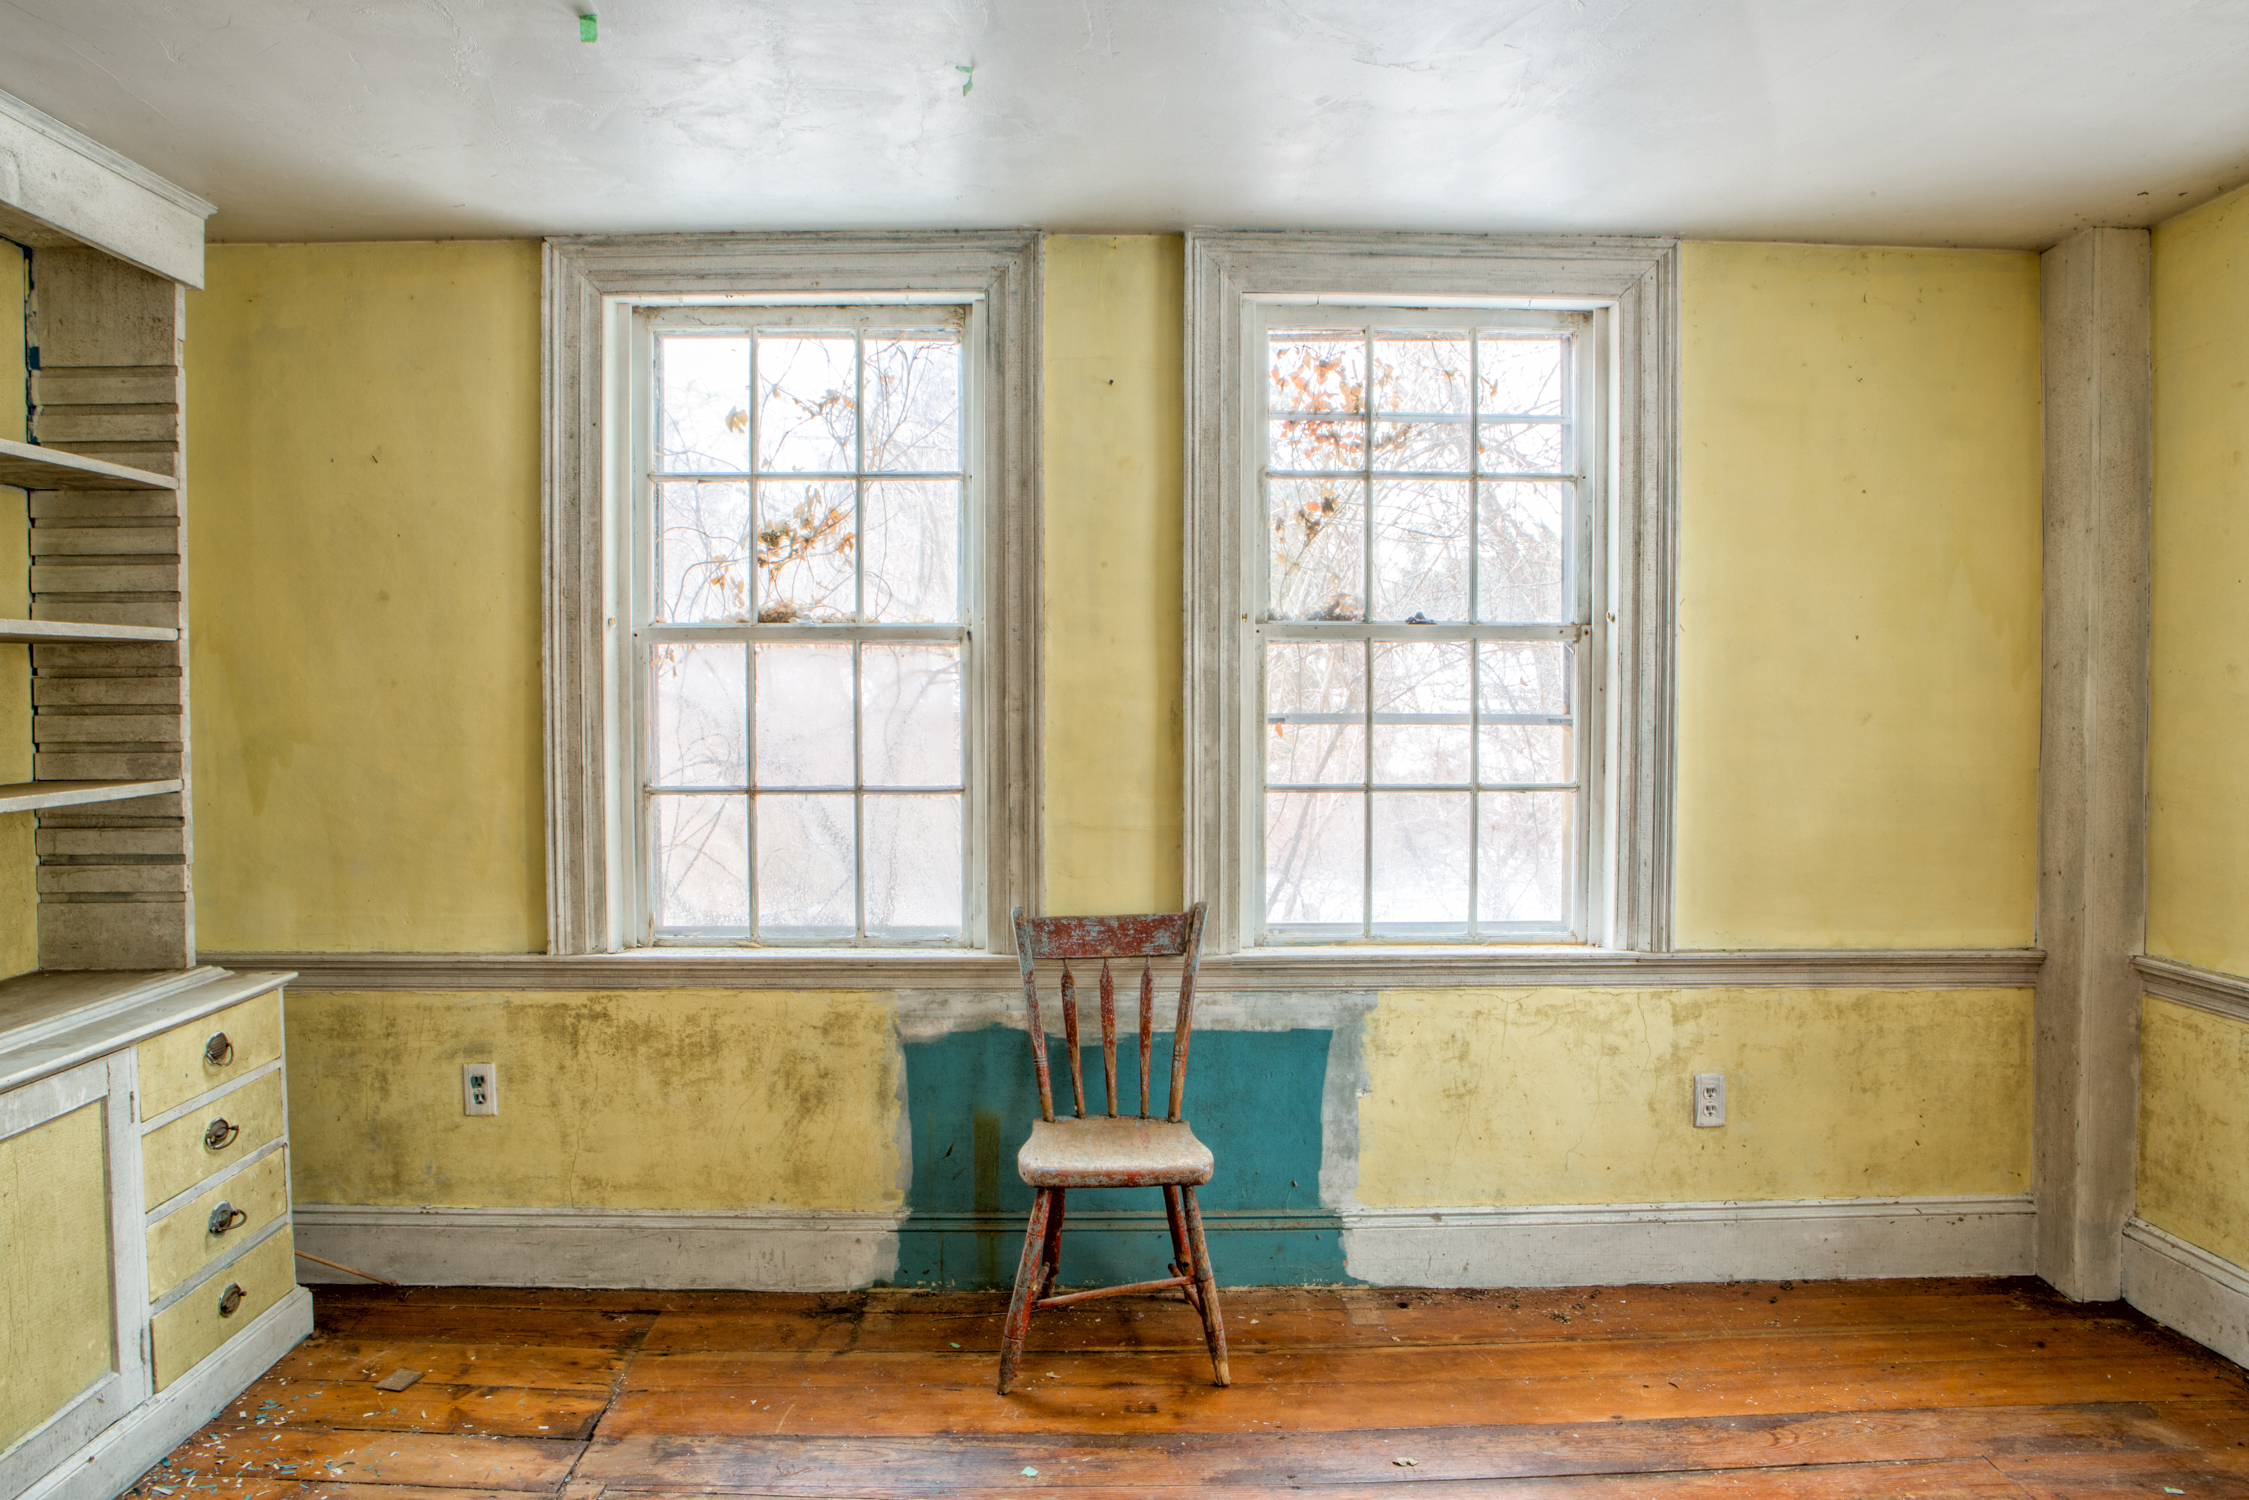  Rebecca Skinner,  “Yellow Room”   Photograph on Aluminum, 11 x 17 inches 